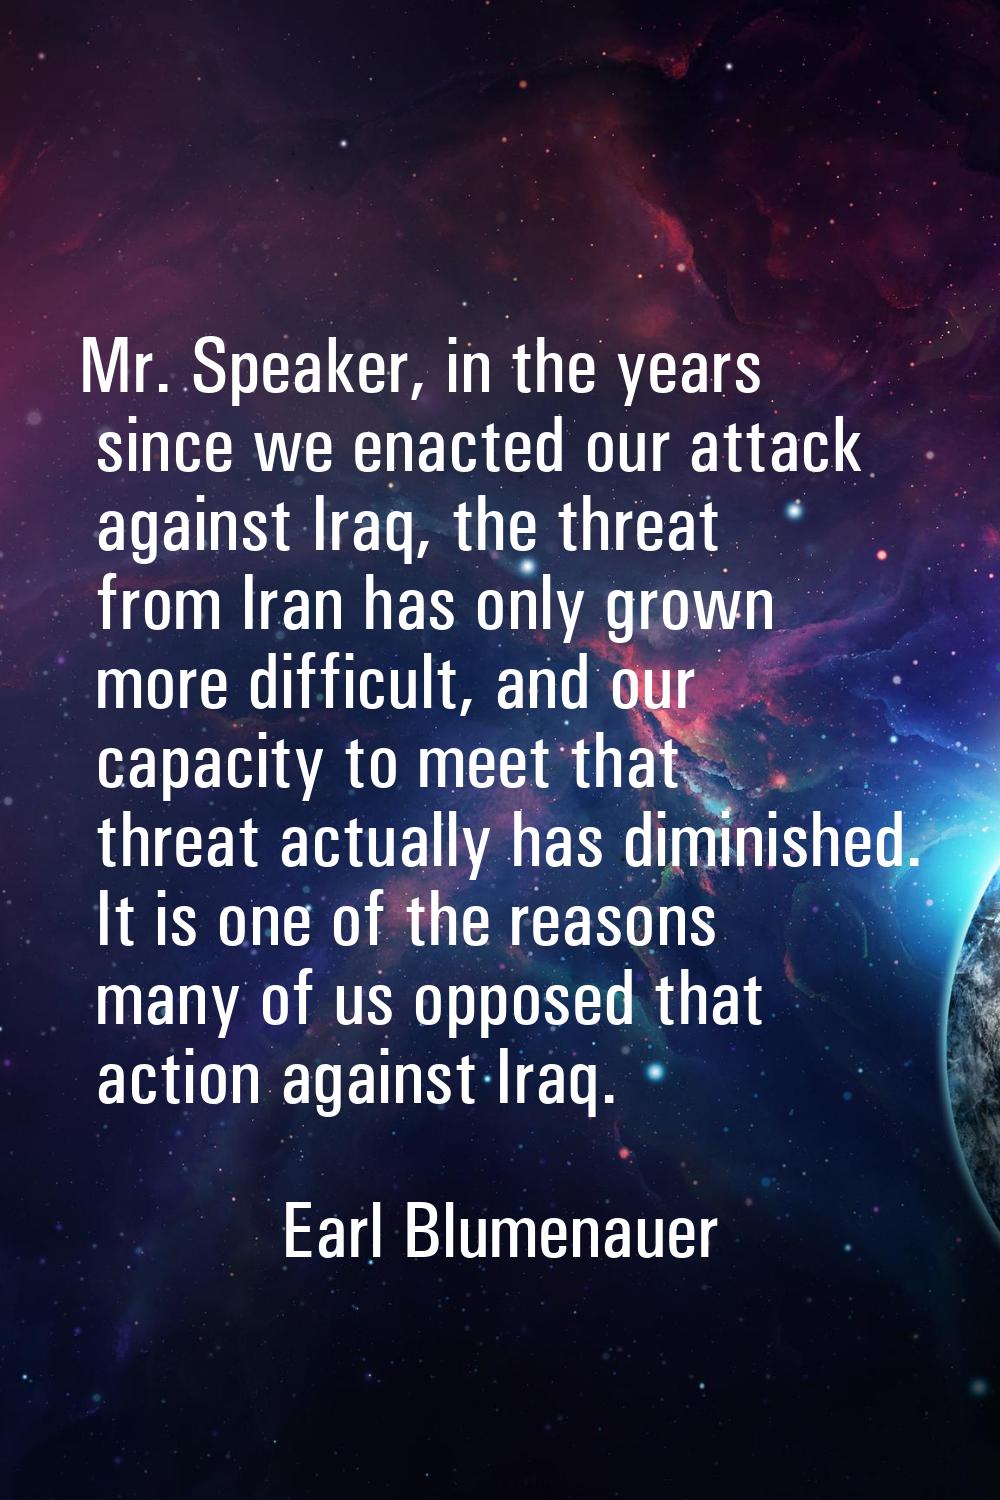 Mr. Speaker, in the years since we enacted our attack against Iraq, the threat from Iran has only g